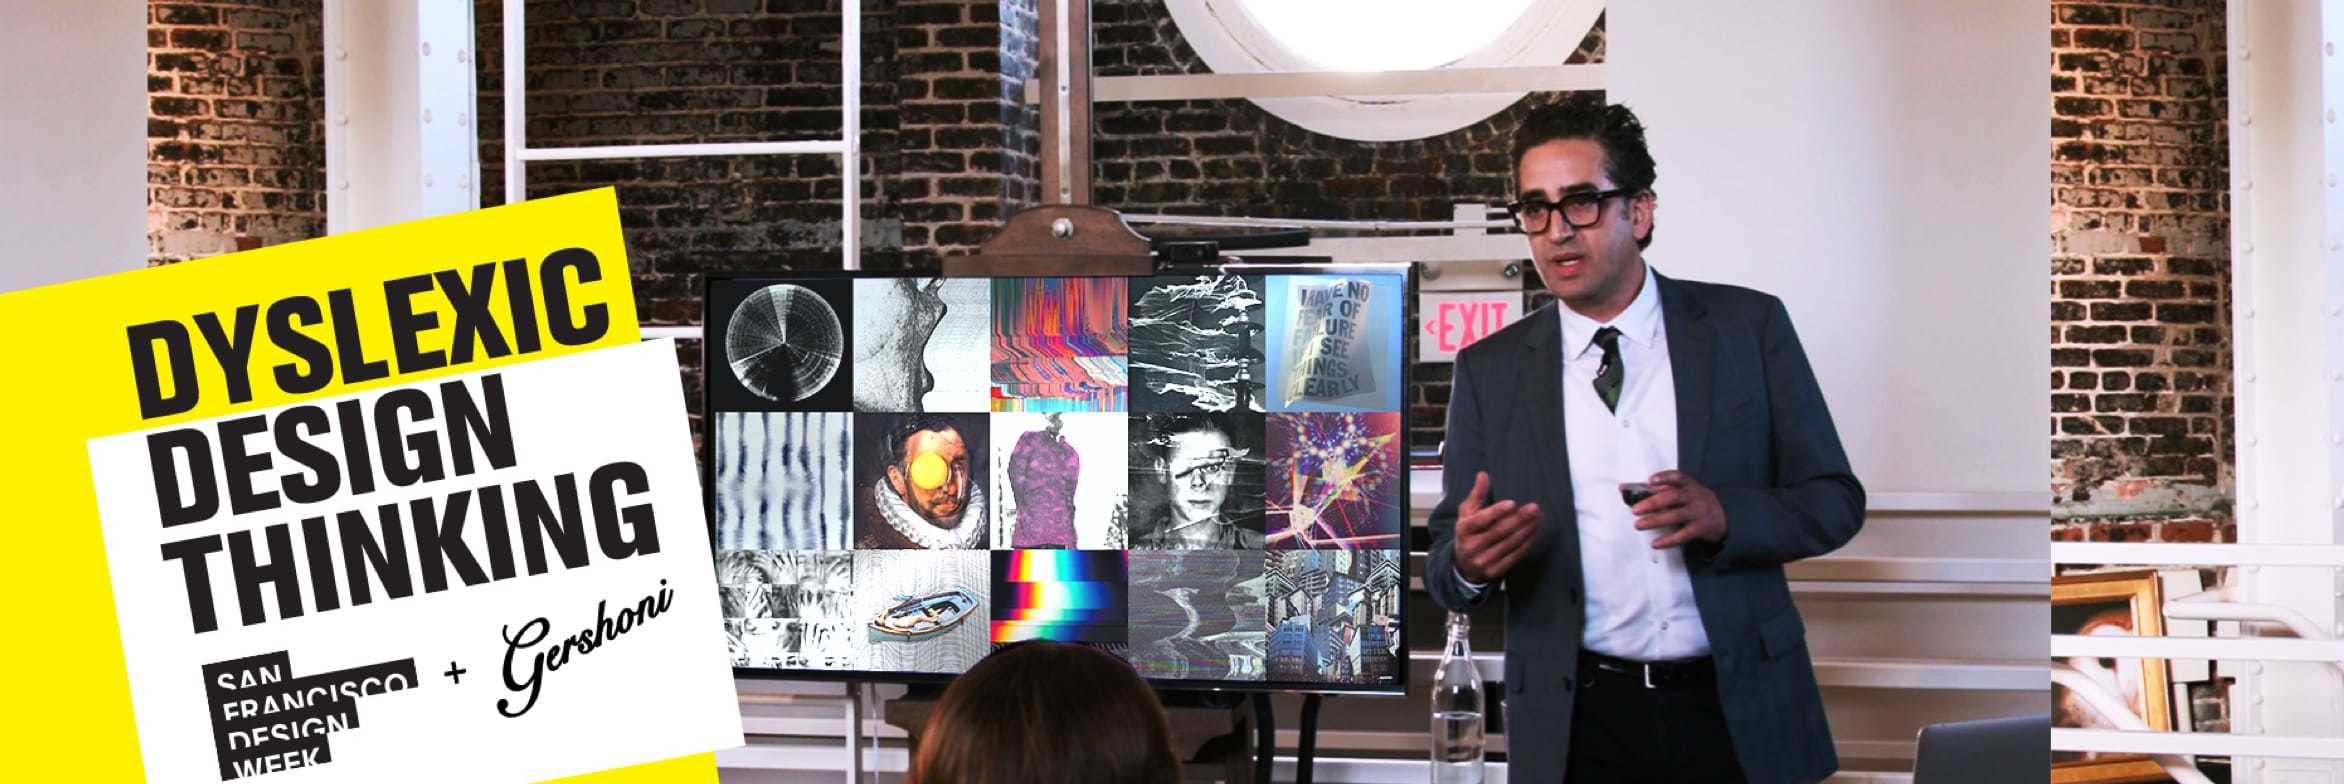 Gil Gershoni giving a lecture at San Francisco Design Week. He is standing in front of a screen filled with distorted images.